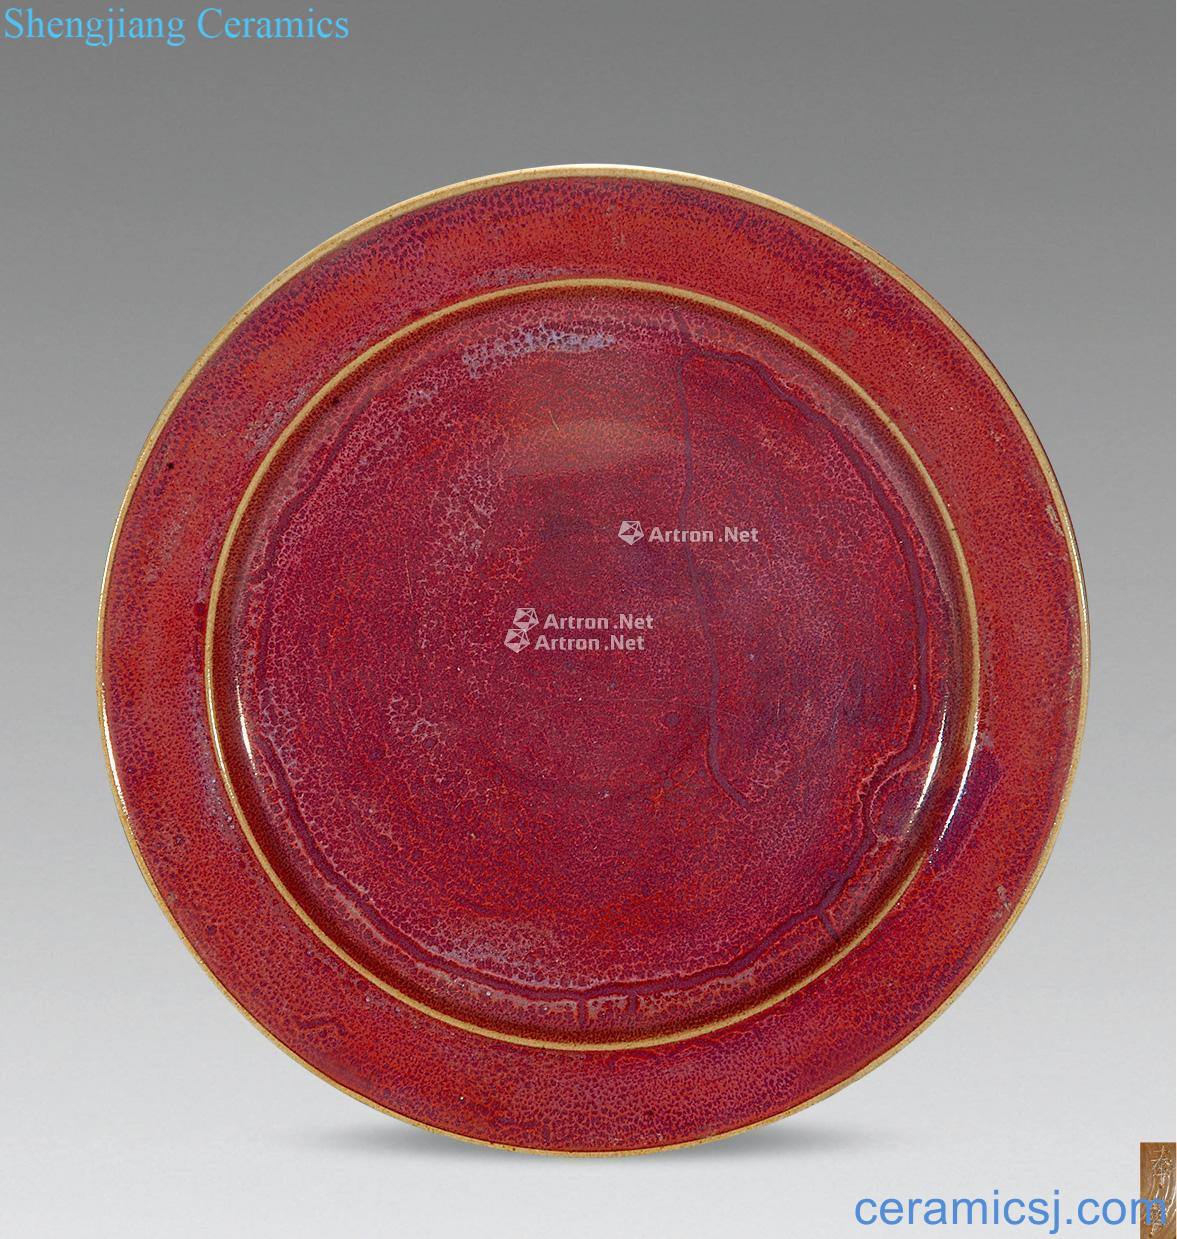 Ming or earlier In China all purple plate masterpieces